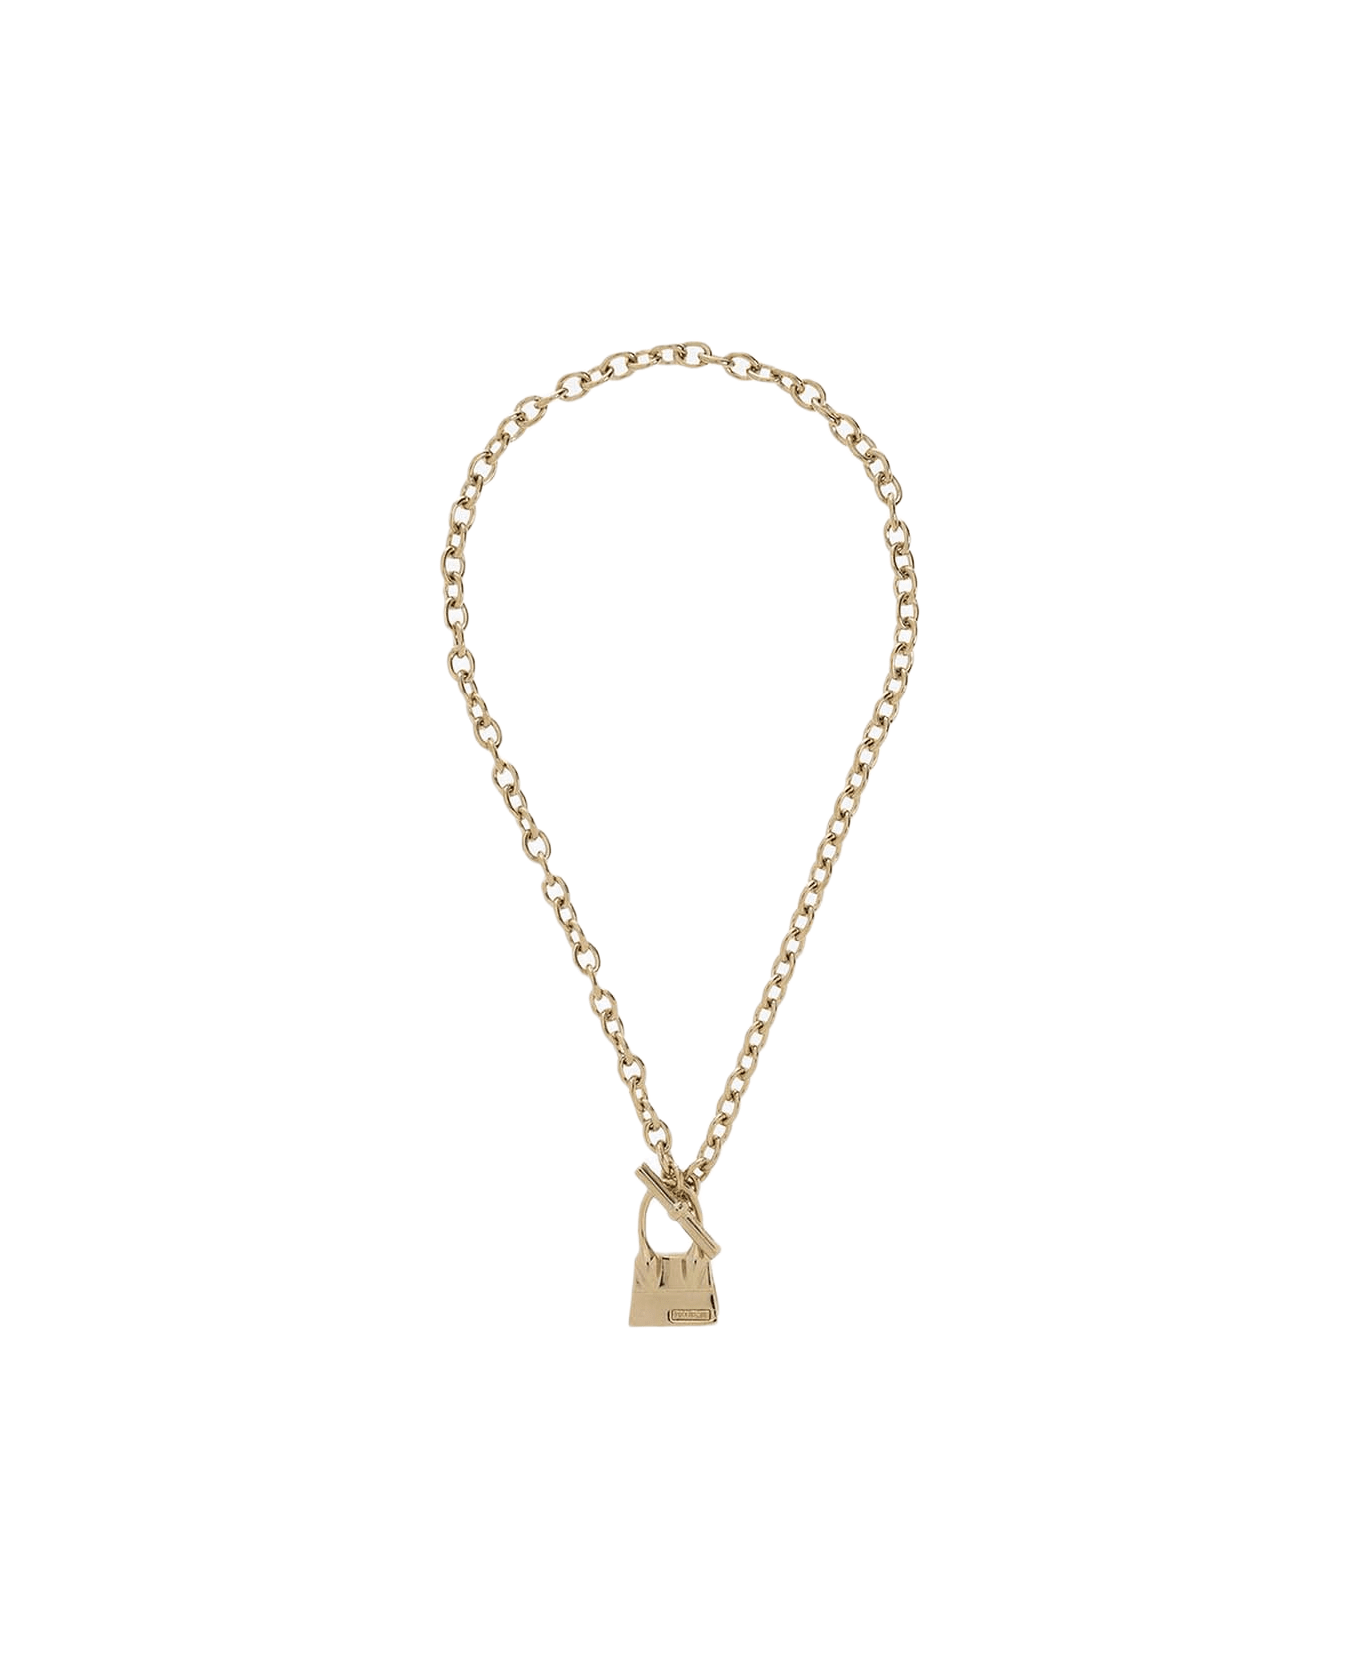 Jacquemus Le Collier Chiquito Barre - LIGHT GOLD ネックレス